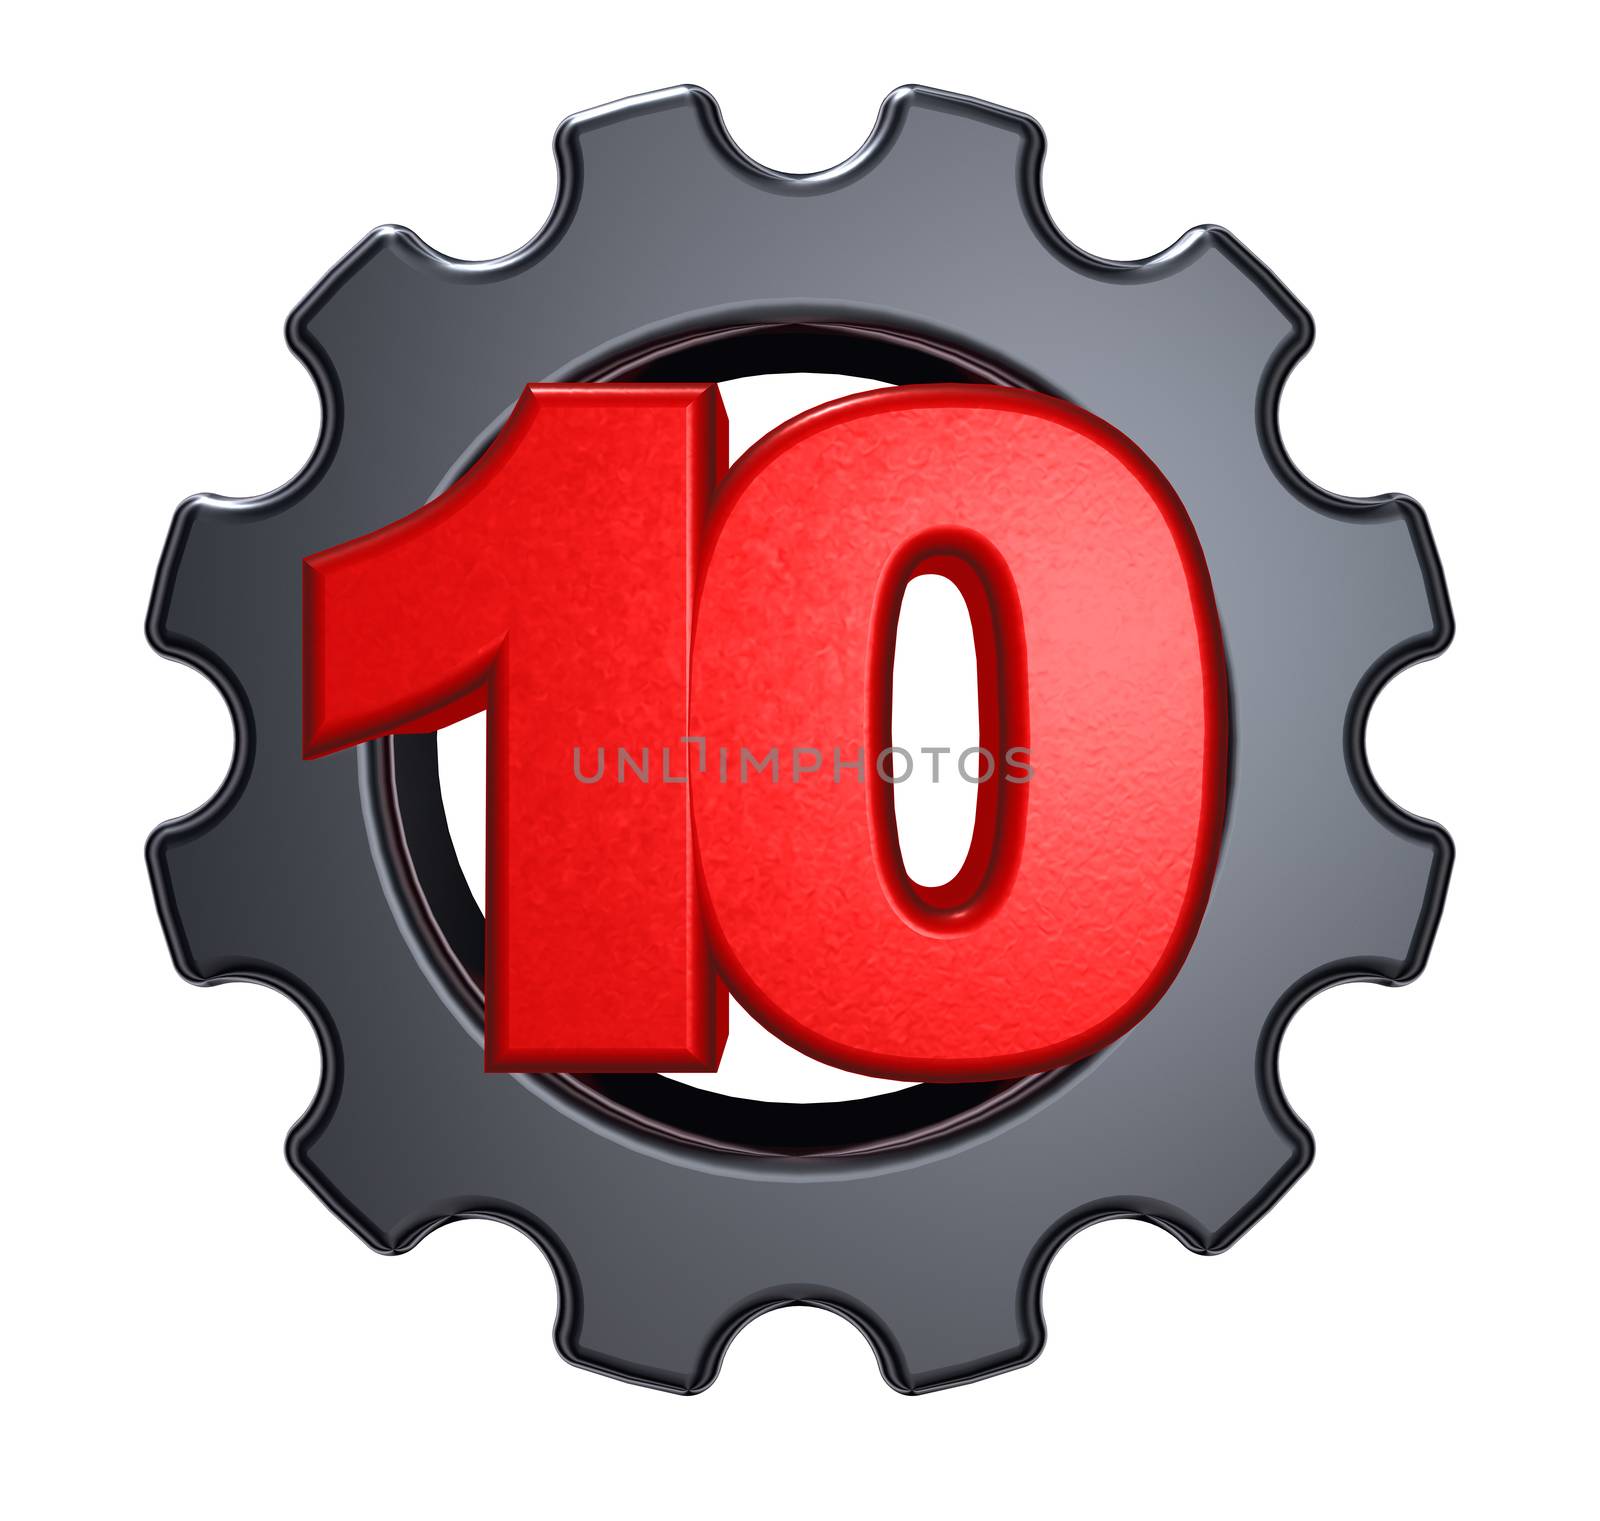 number ten and gear wheel on white background - 3d illustration